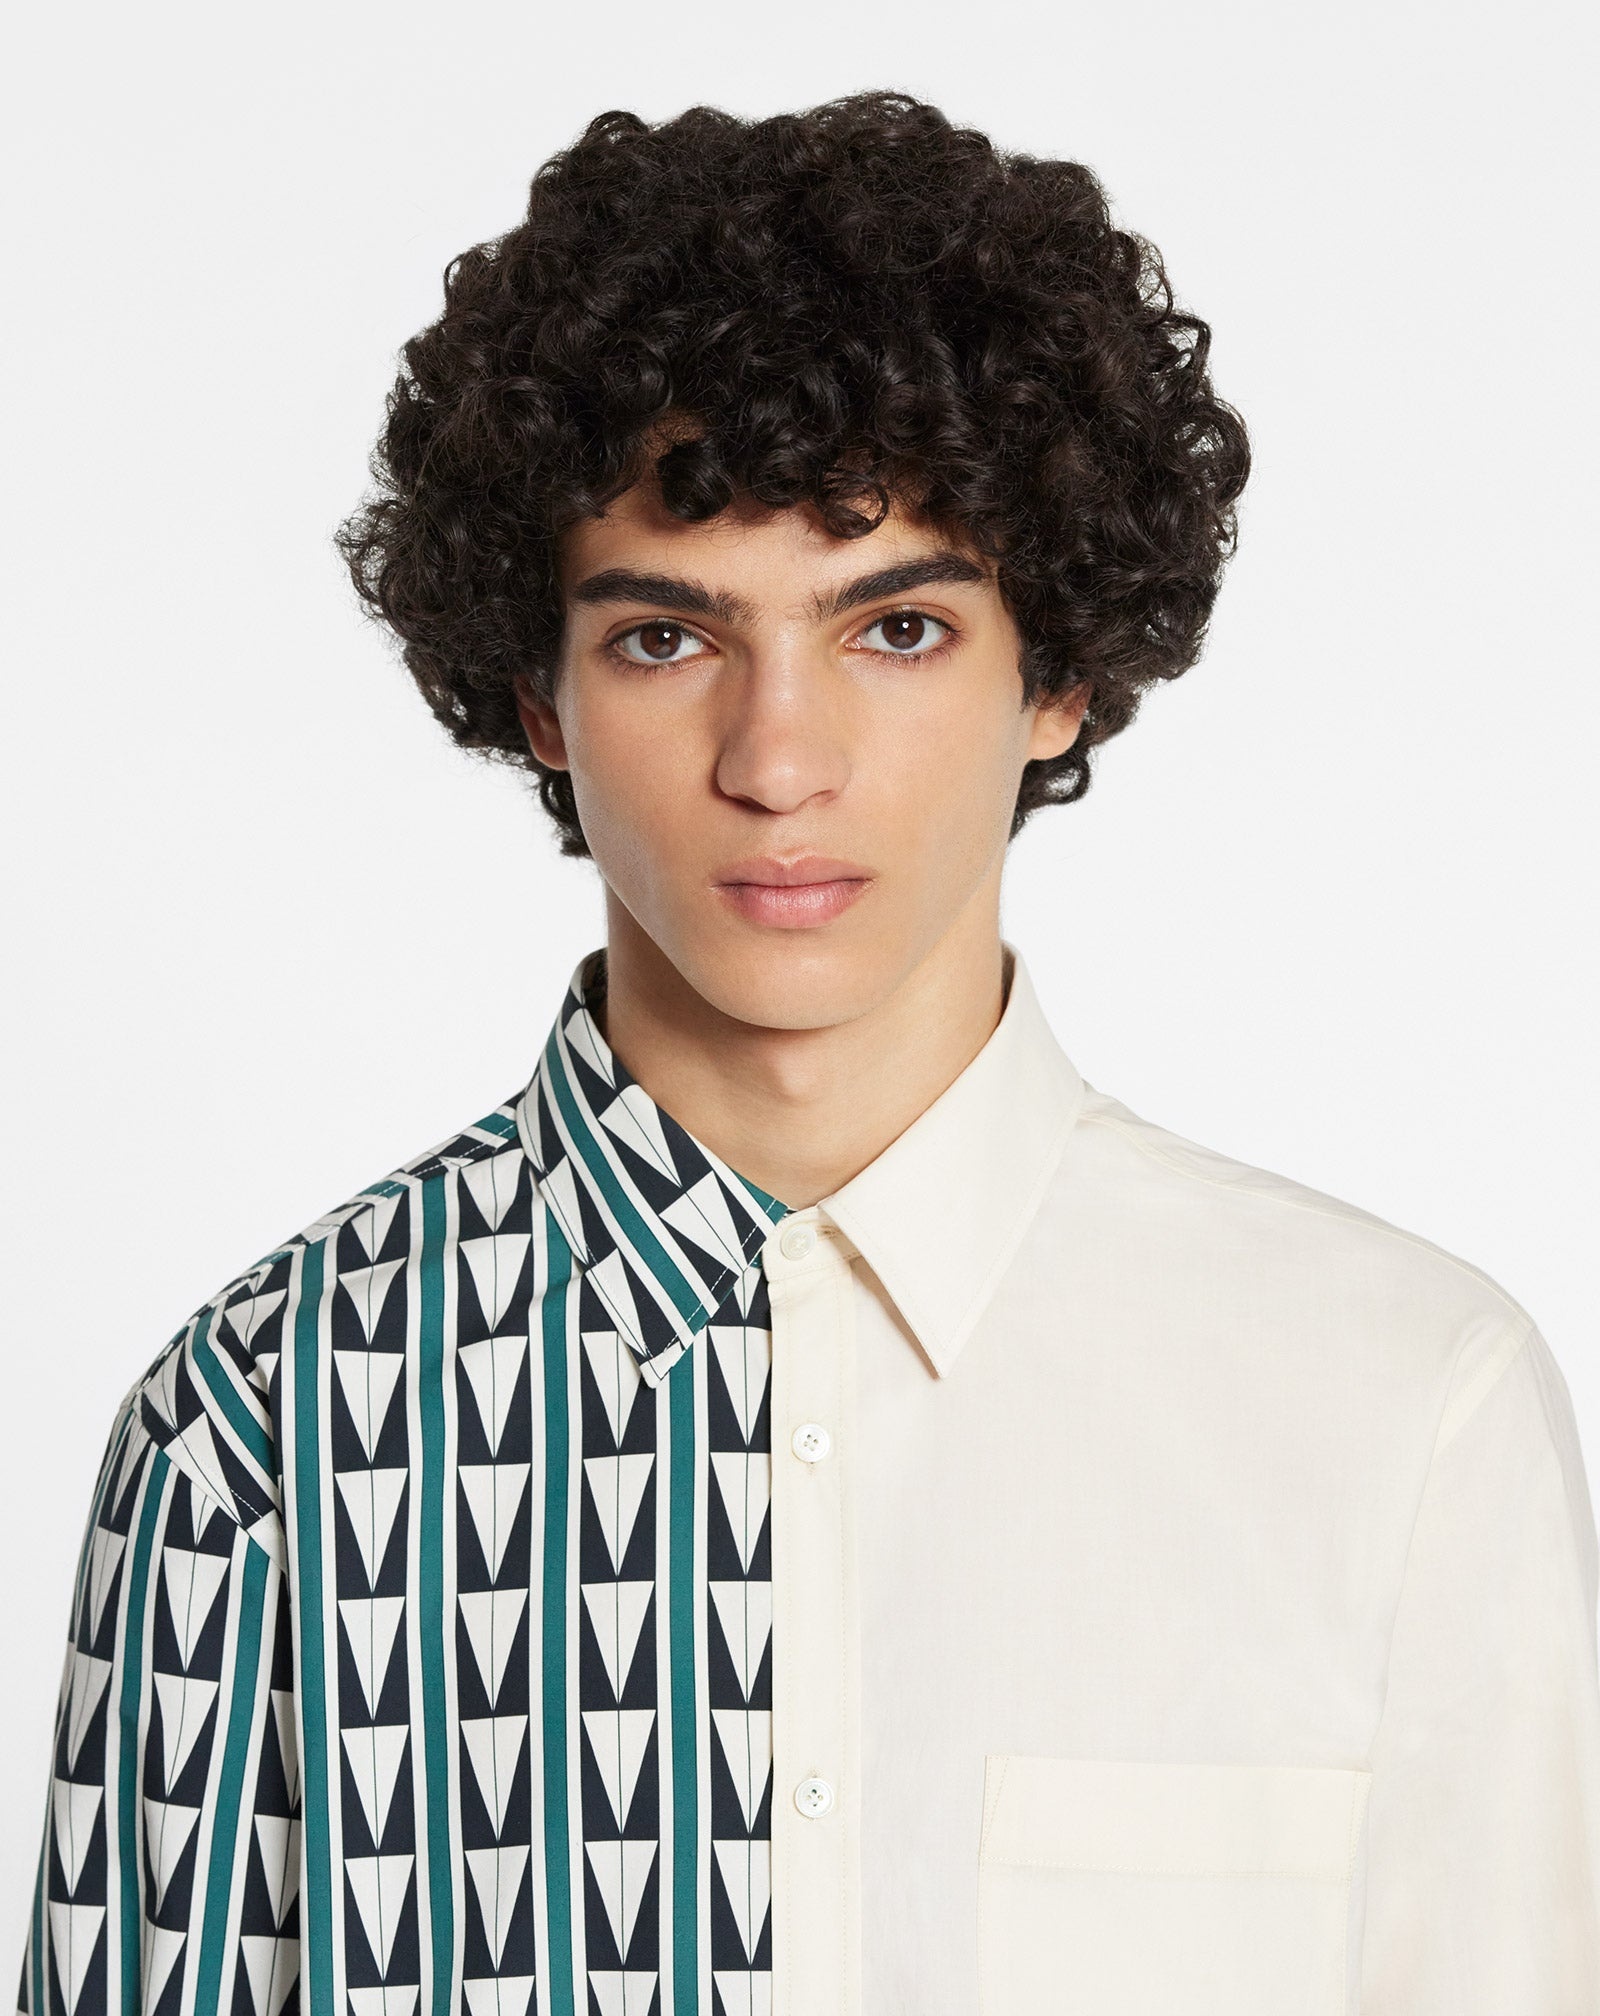 DUAL-PRINT SHIRT WITH ART DECO-INSPIRED TRIANGLES - 4